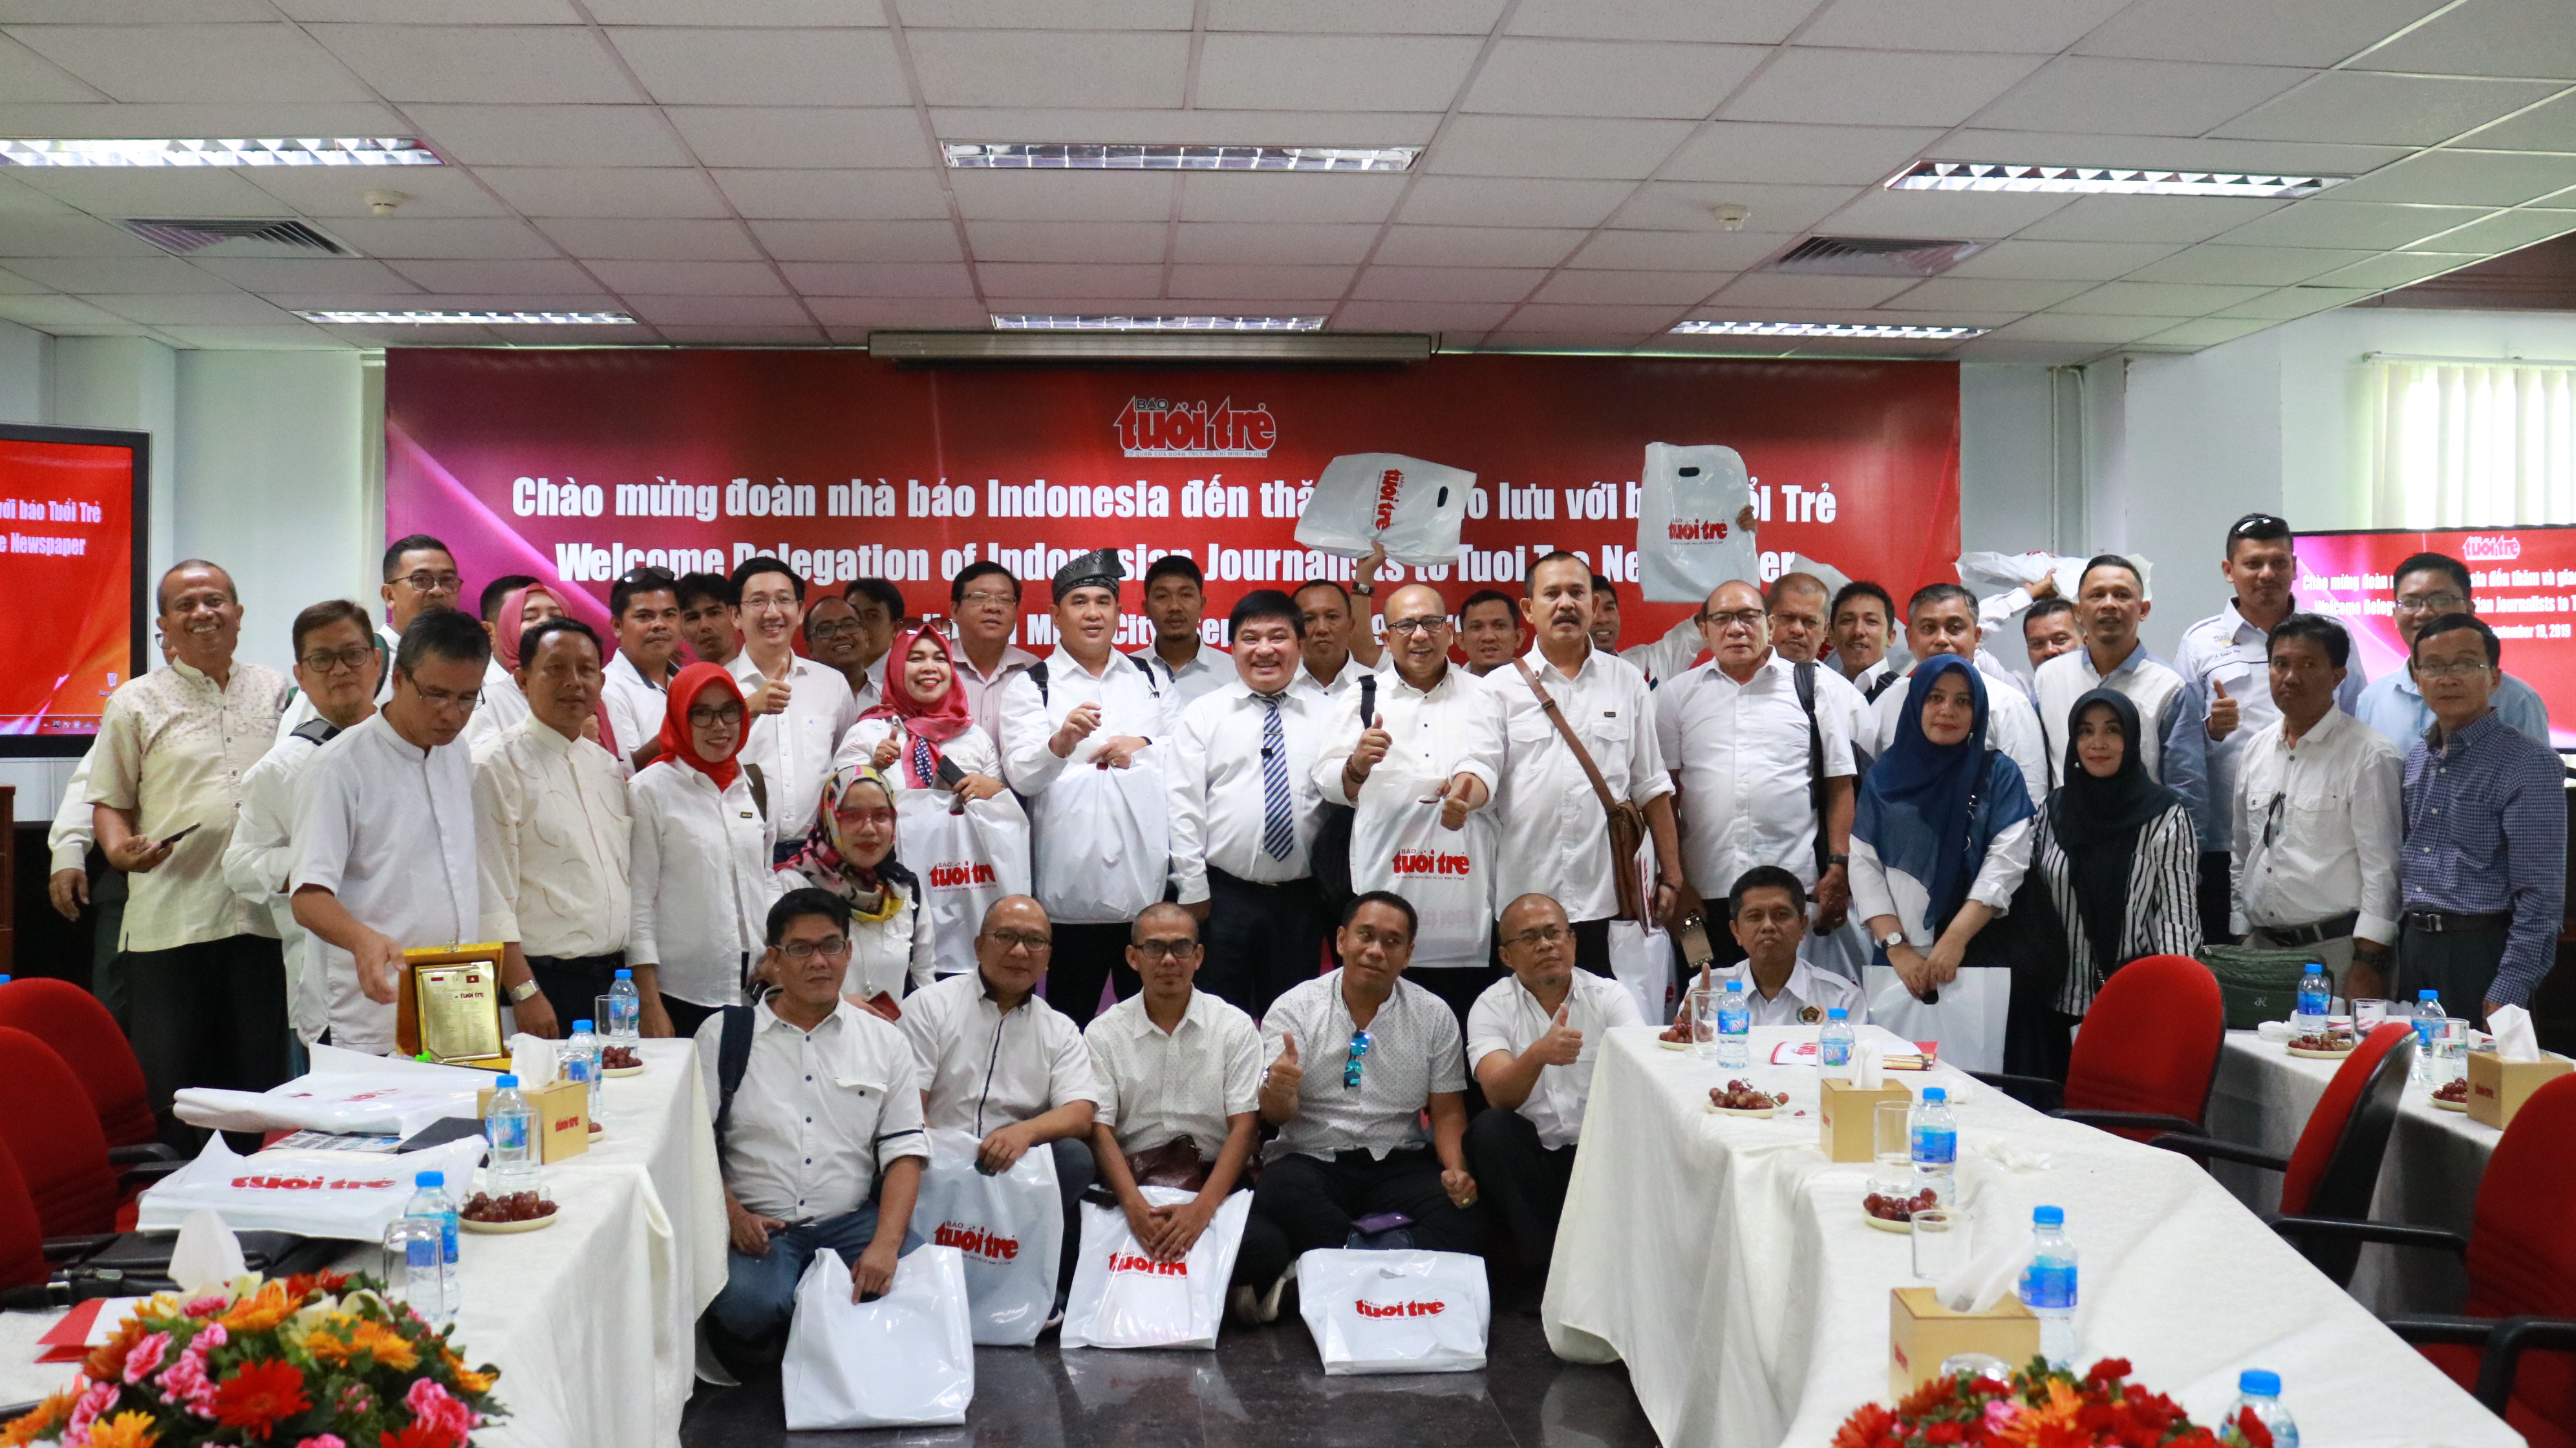 Tuoi Tre and Indonesian journalists take a group photo at the newspaper's main office in Ho Chi Minh City, Vietnam, September 19, 2019. Photo: Ngoc Phuong / Tuoi Tre